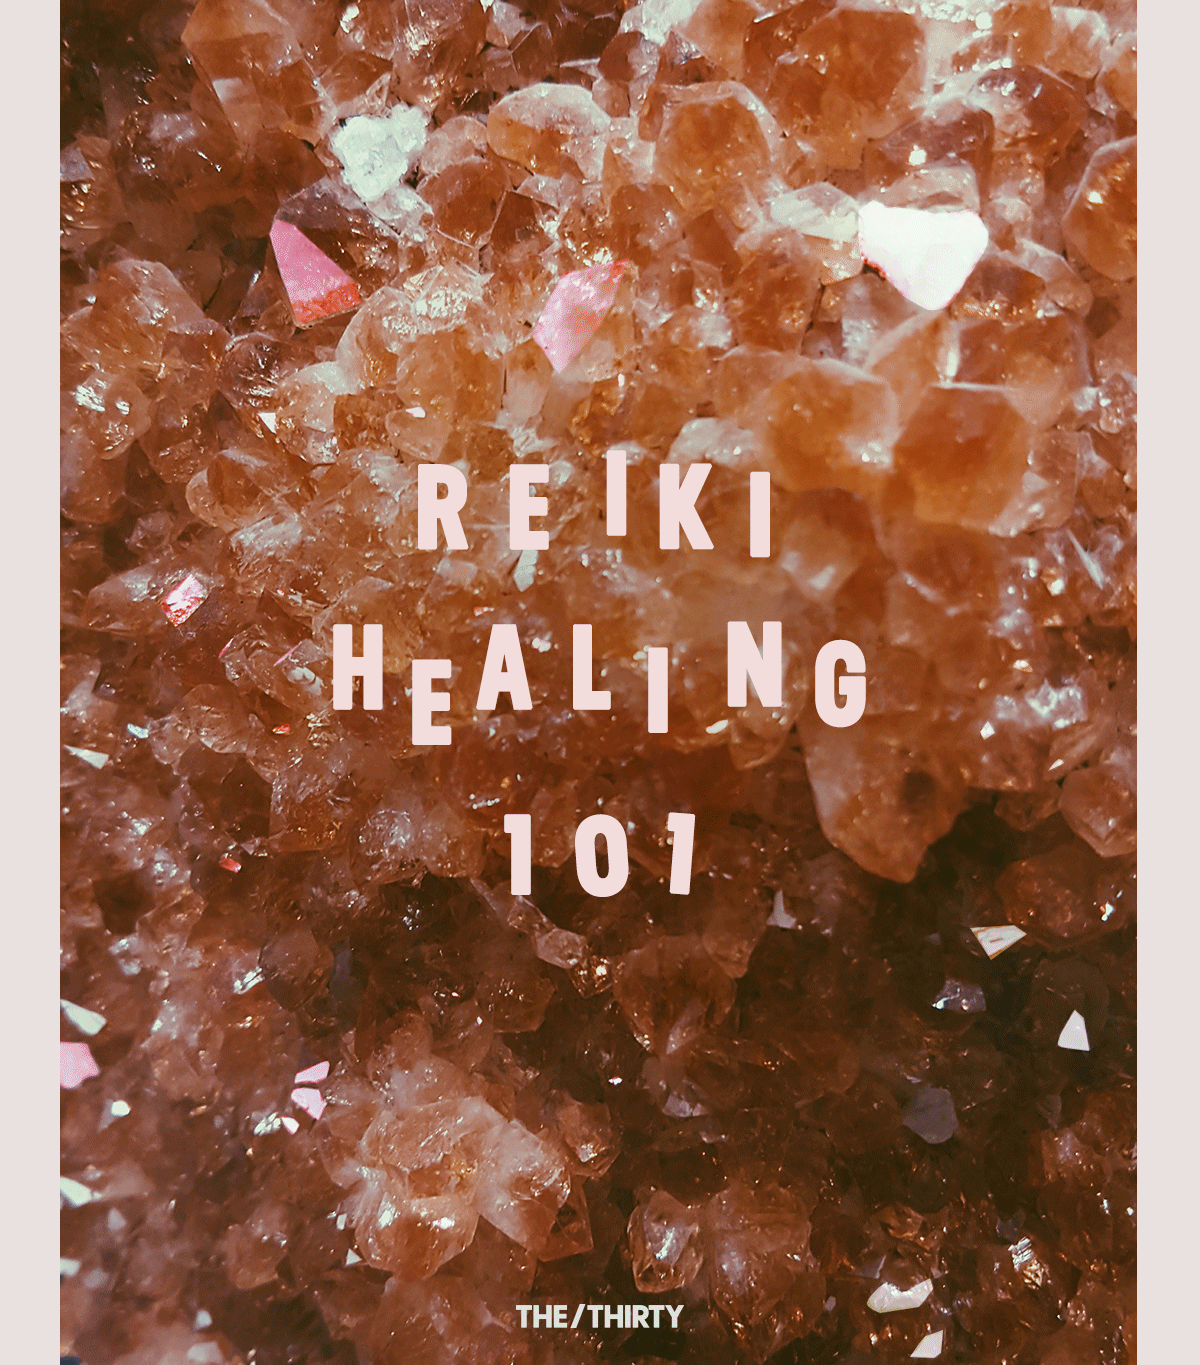 how-does-reiki-work-259833-1528384227488-image